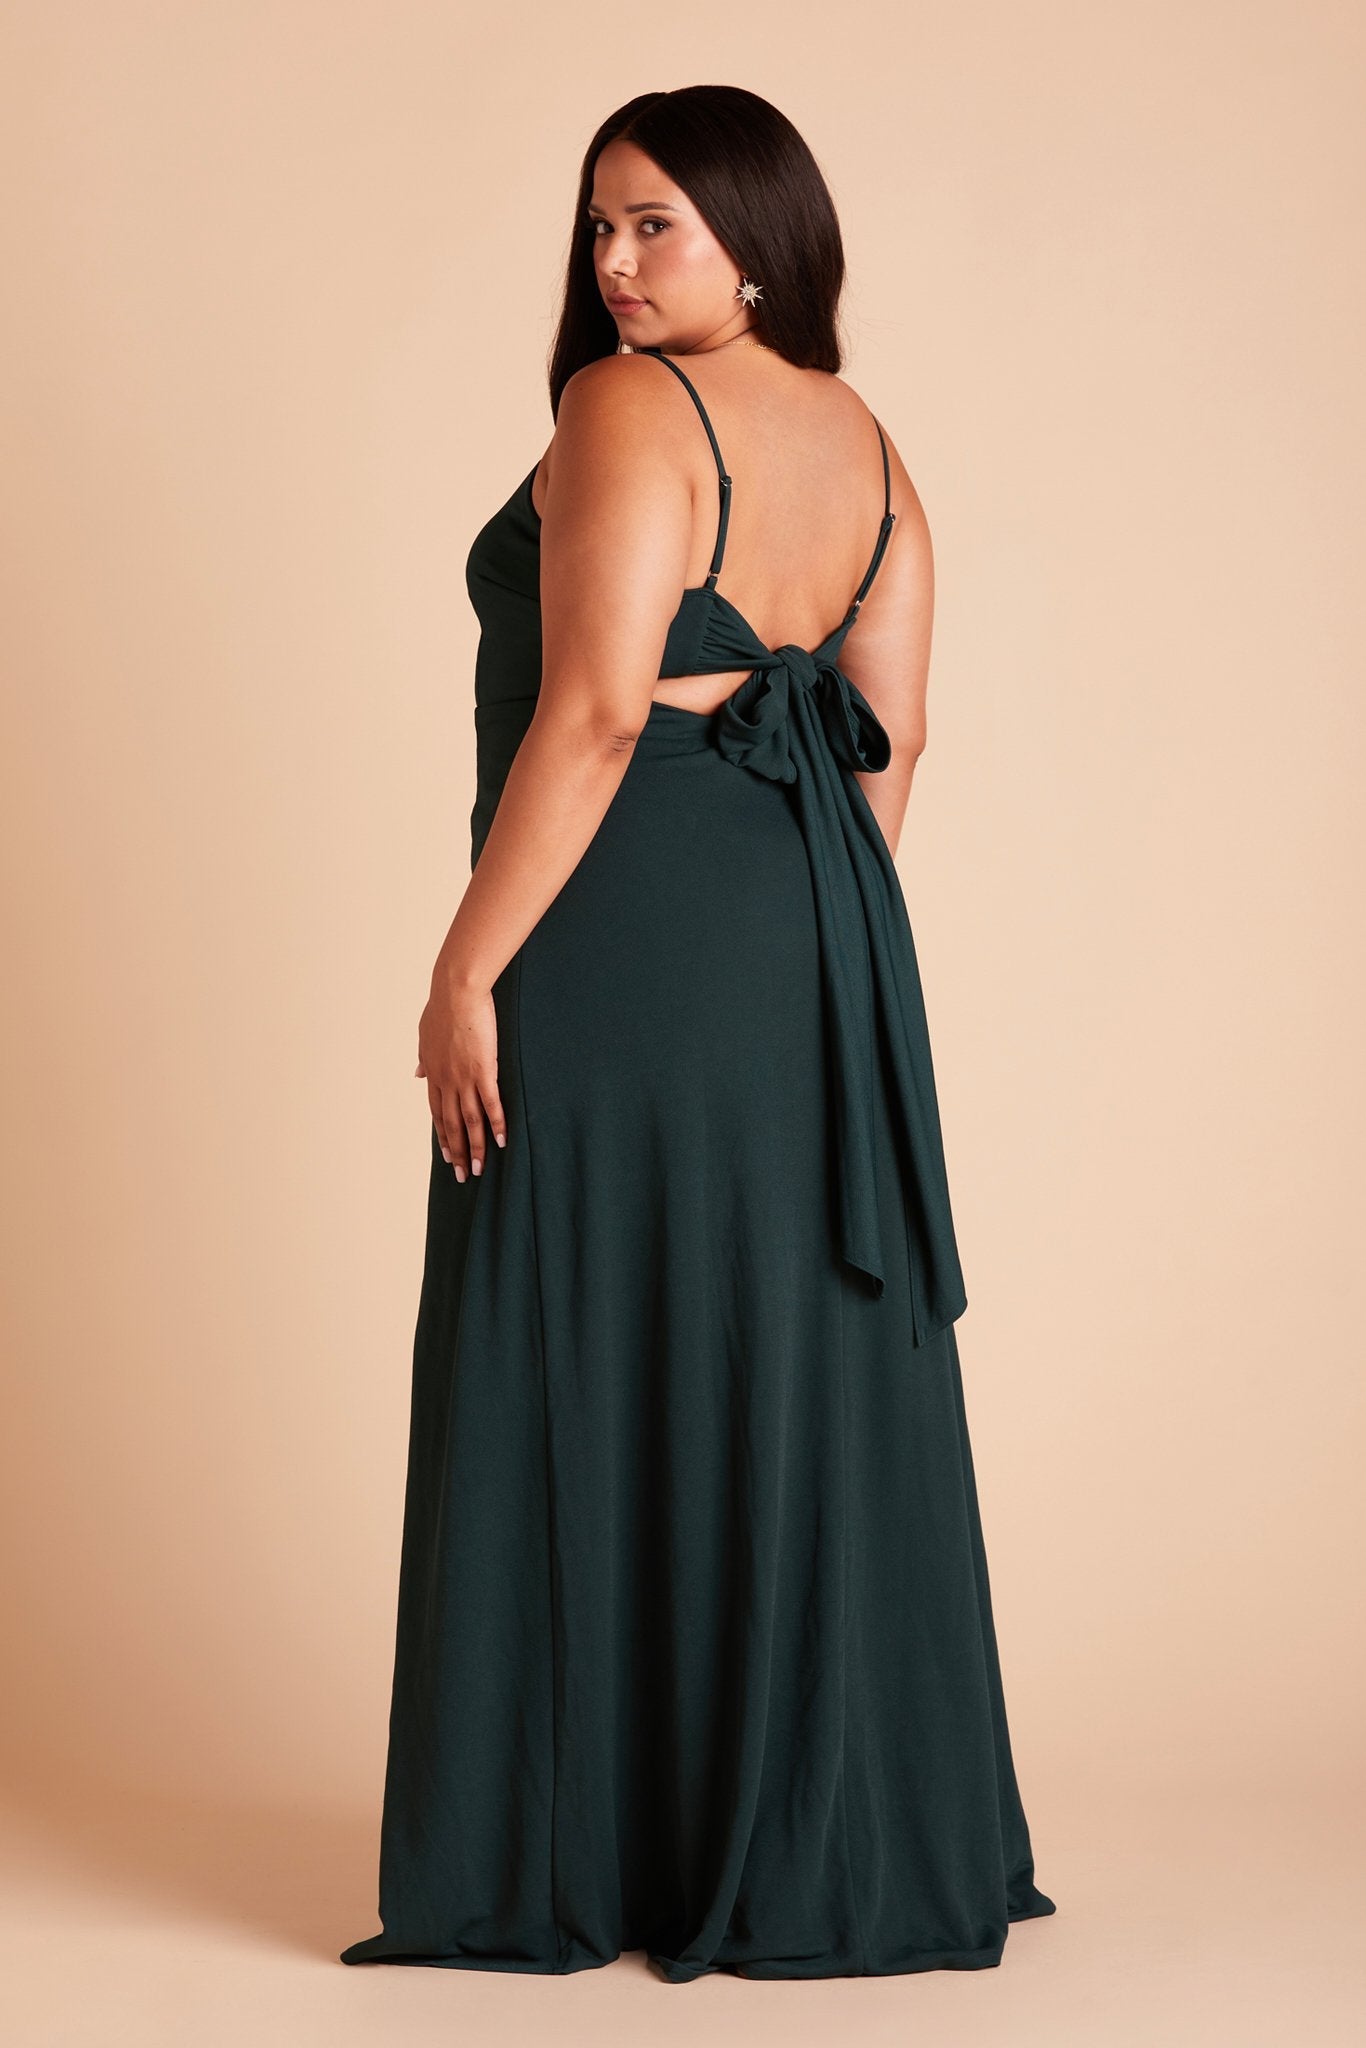 Benny plus size bridesmaid dress in emerald green crepe by Birdy Grey, side view